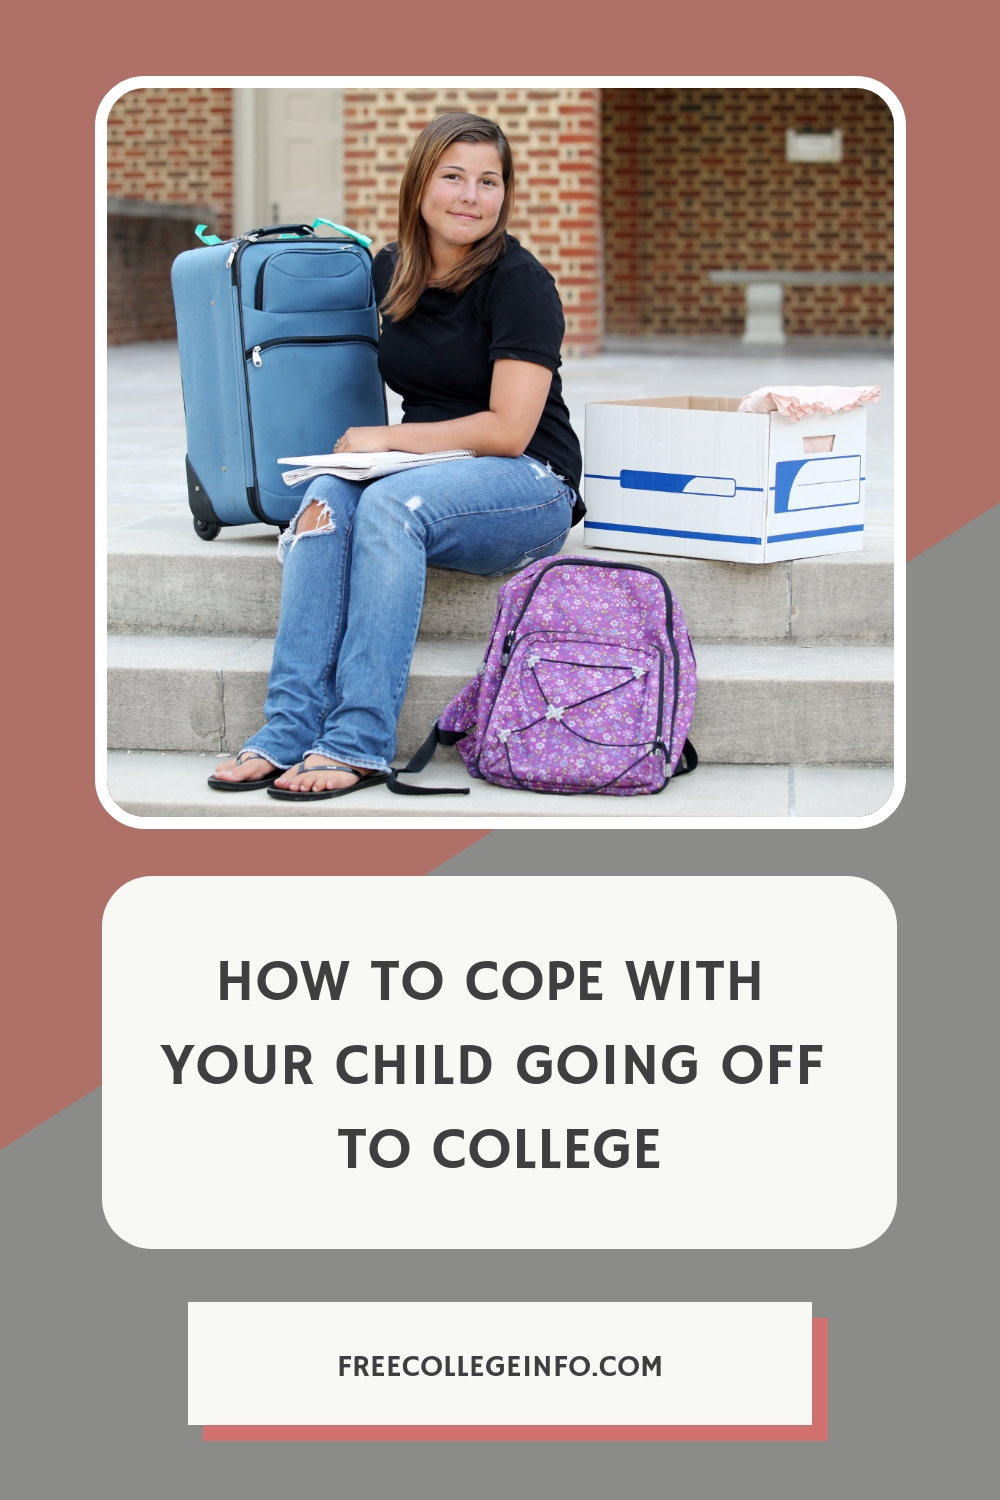 How To Cope With Your Child Going Off To College